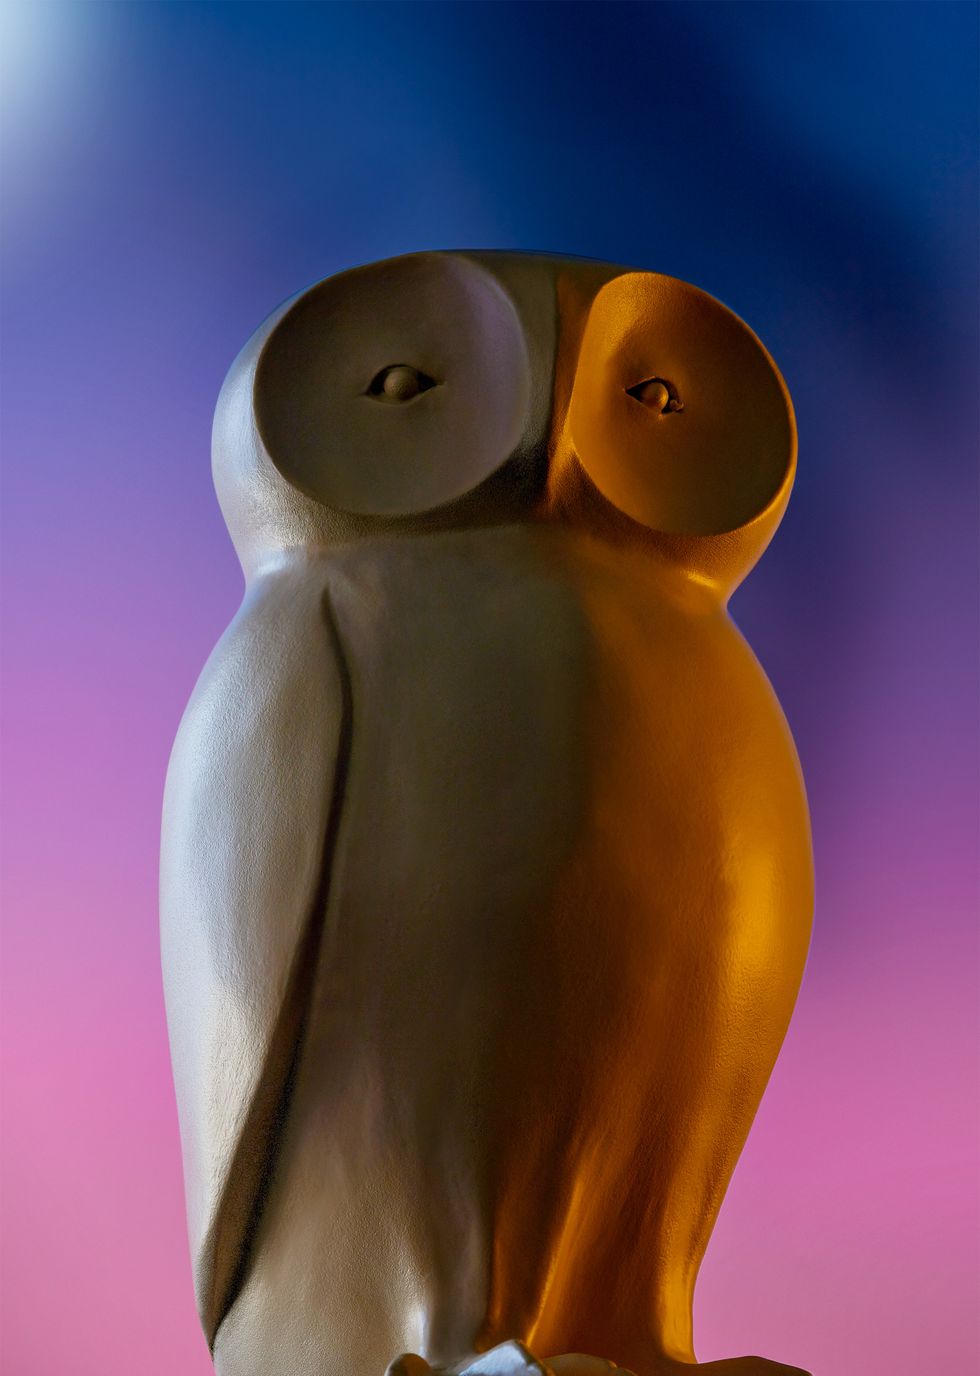 wooden owl on a purple blue background